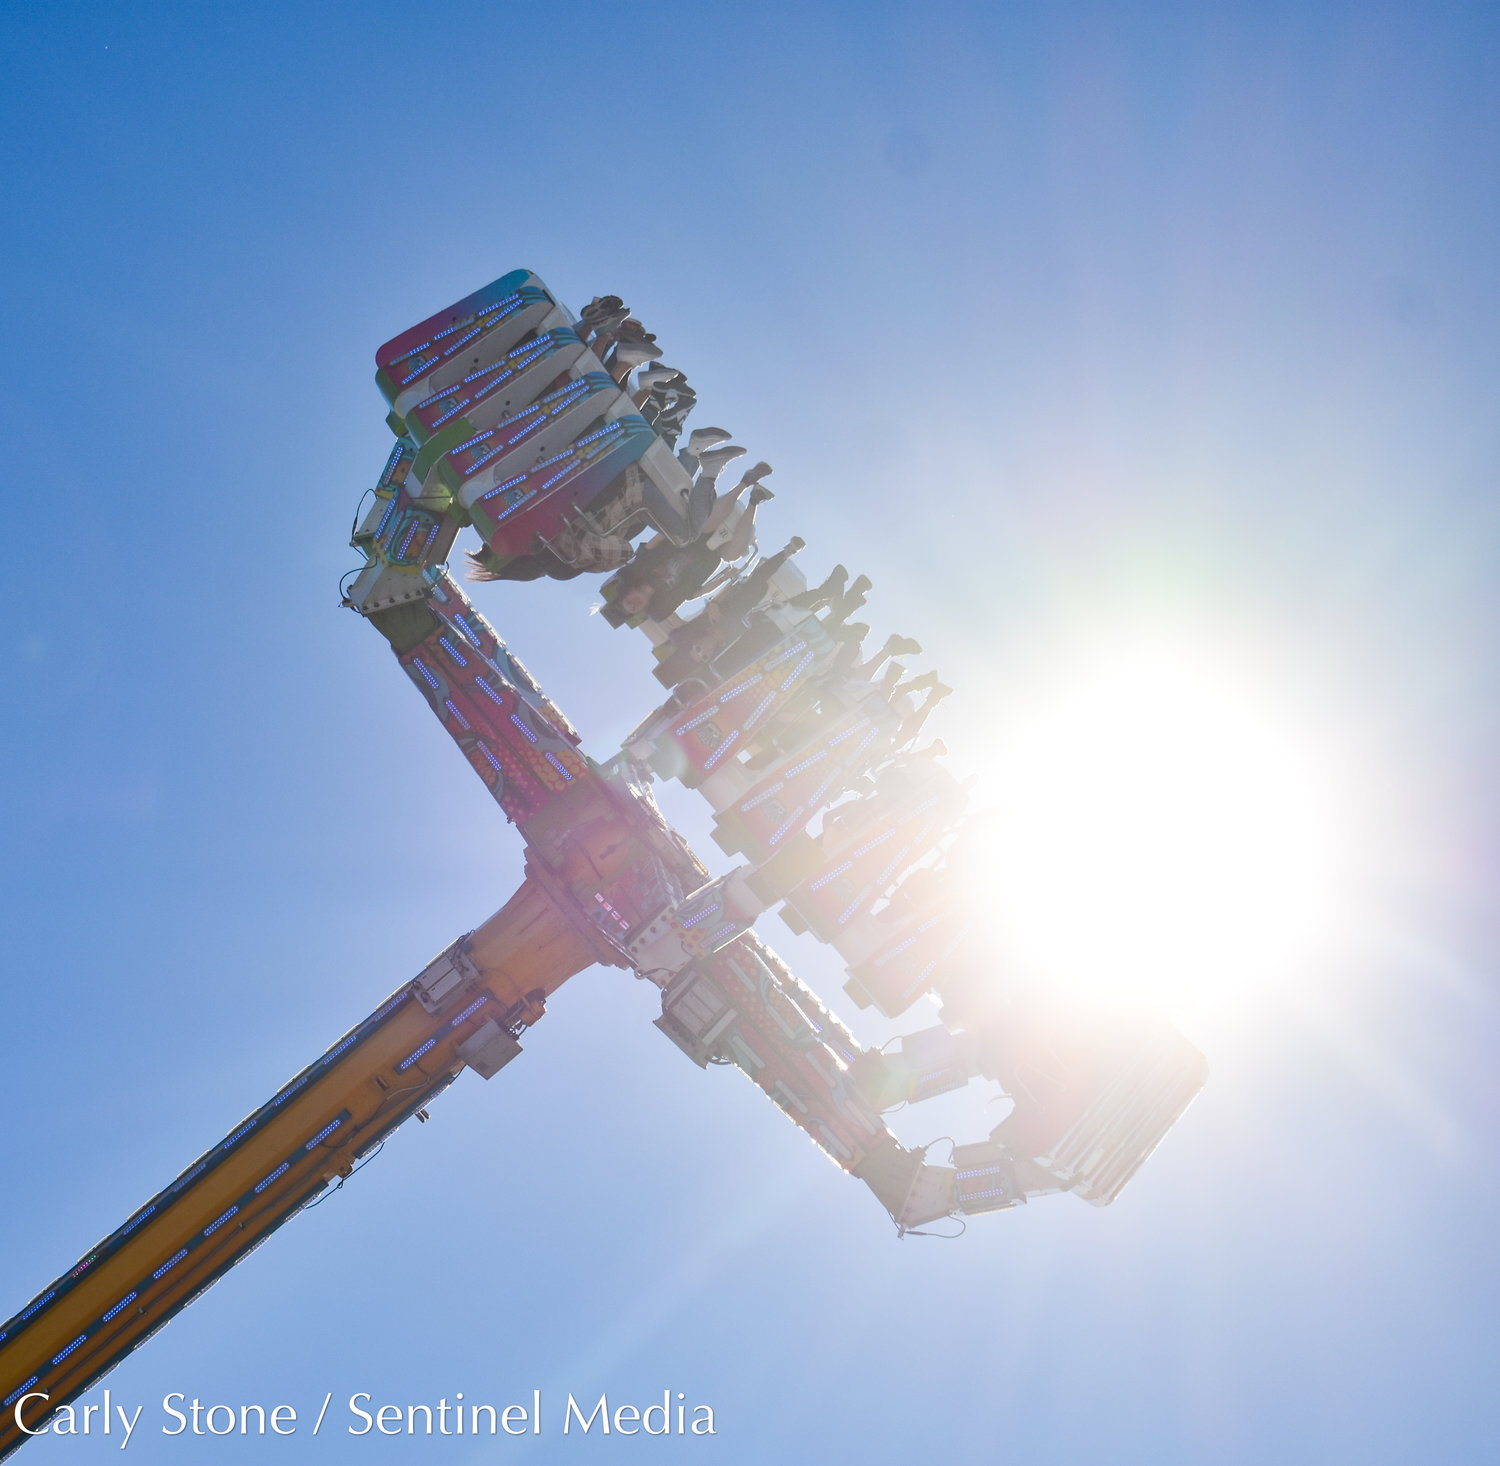 Riders get a thrill swinging high up with the sun on this ride found along the 2022 state fair midway.